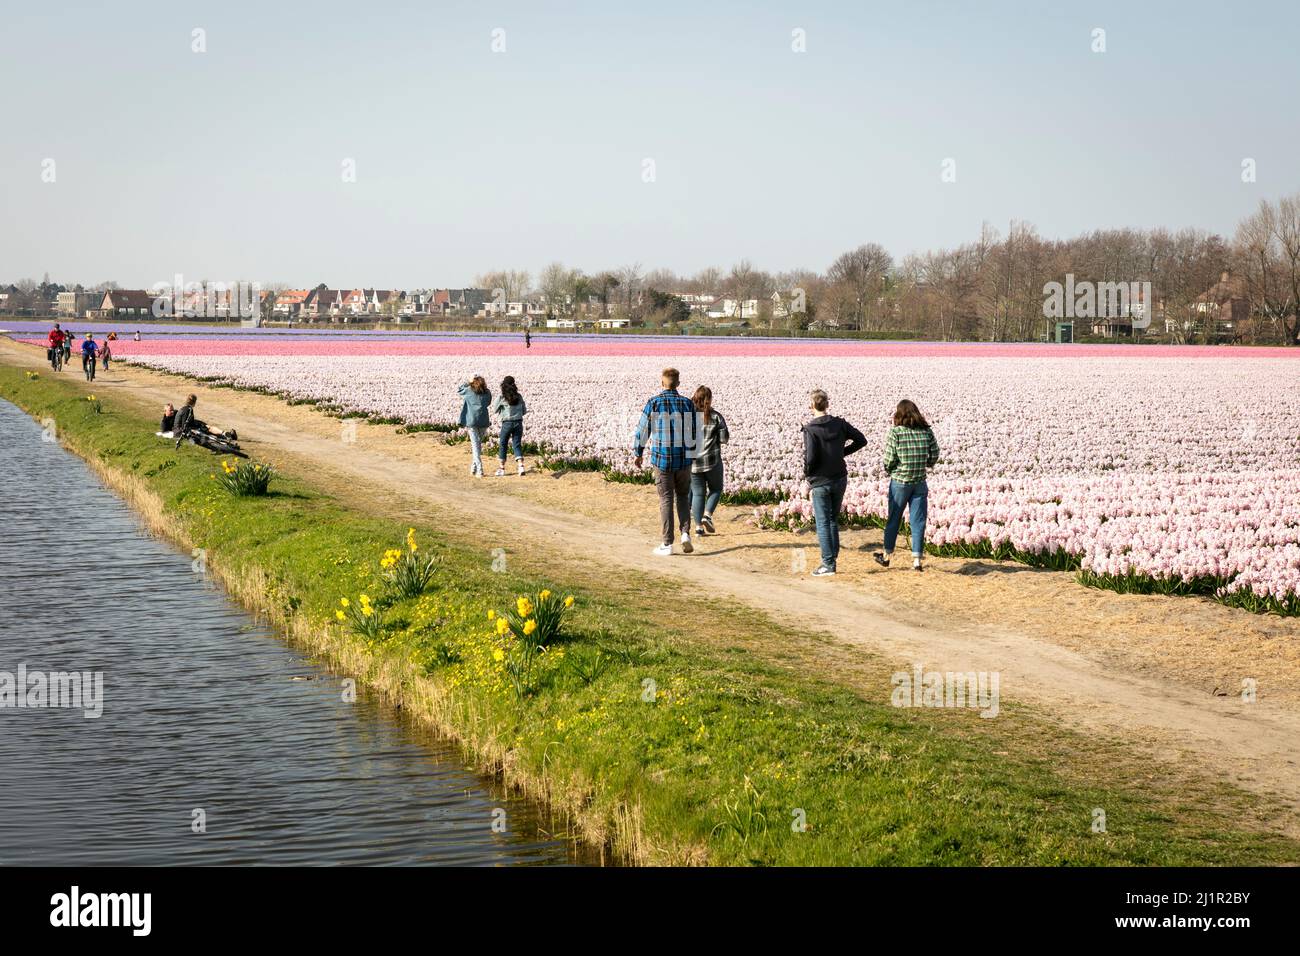 Families walk along rows and rows of Hyacinths (Hyacinthus orientalis), in bloom, on an early Spring day in the Dutch flower fields around Lisse in the Netherlands. Stock Photo